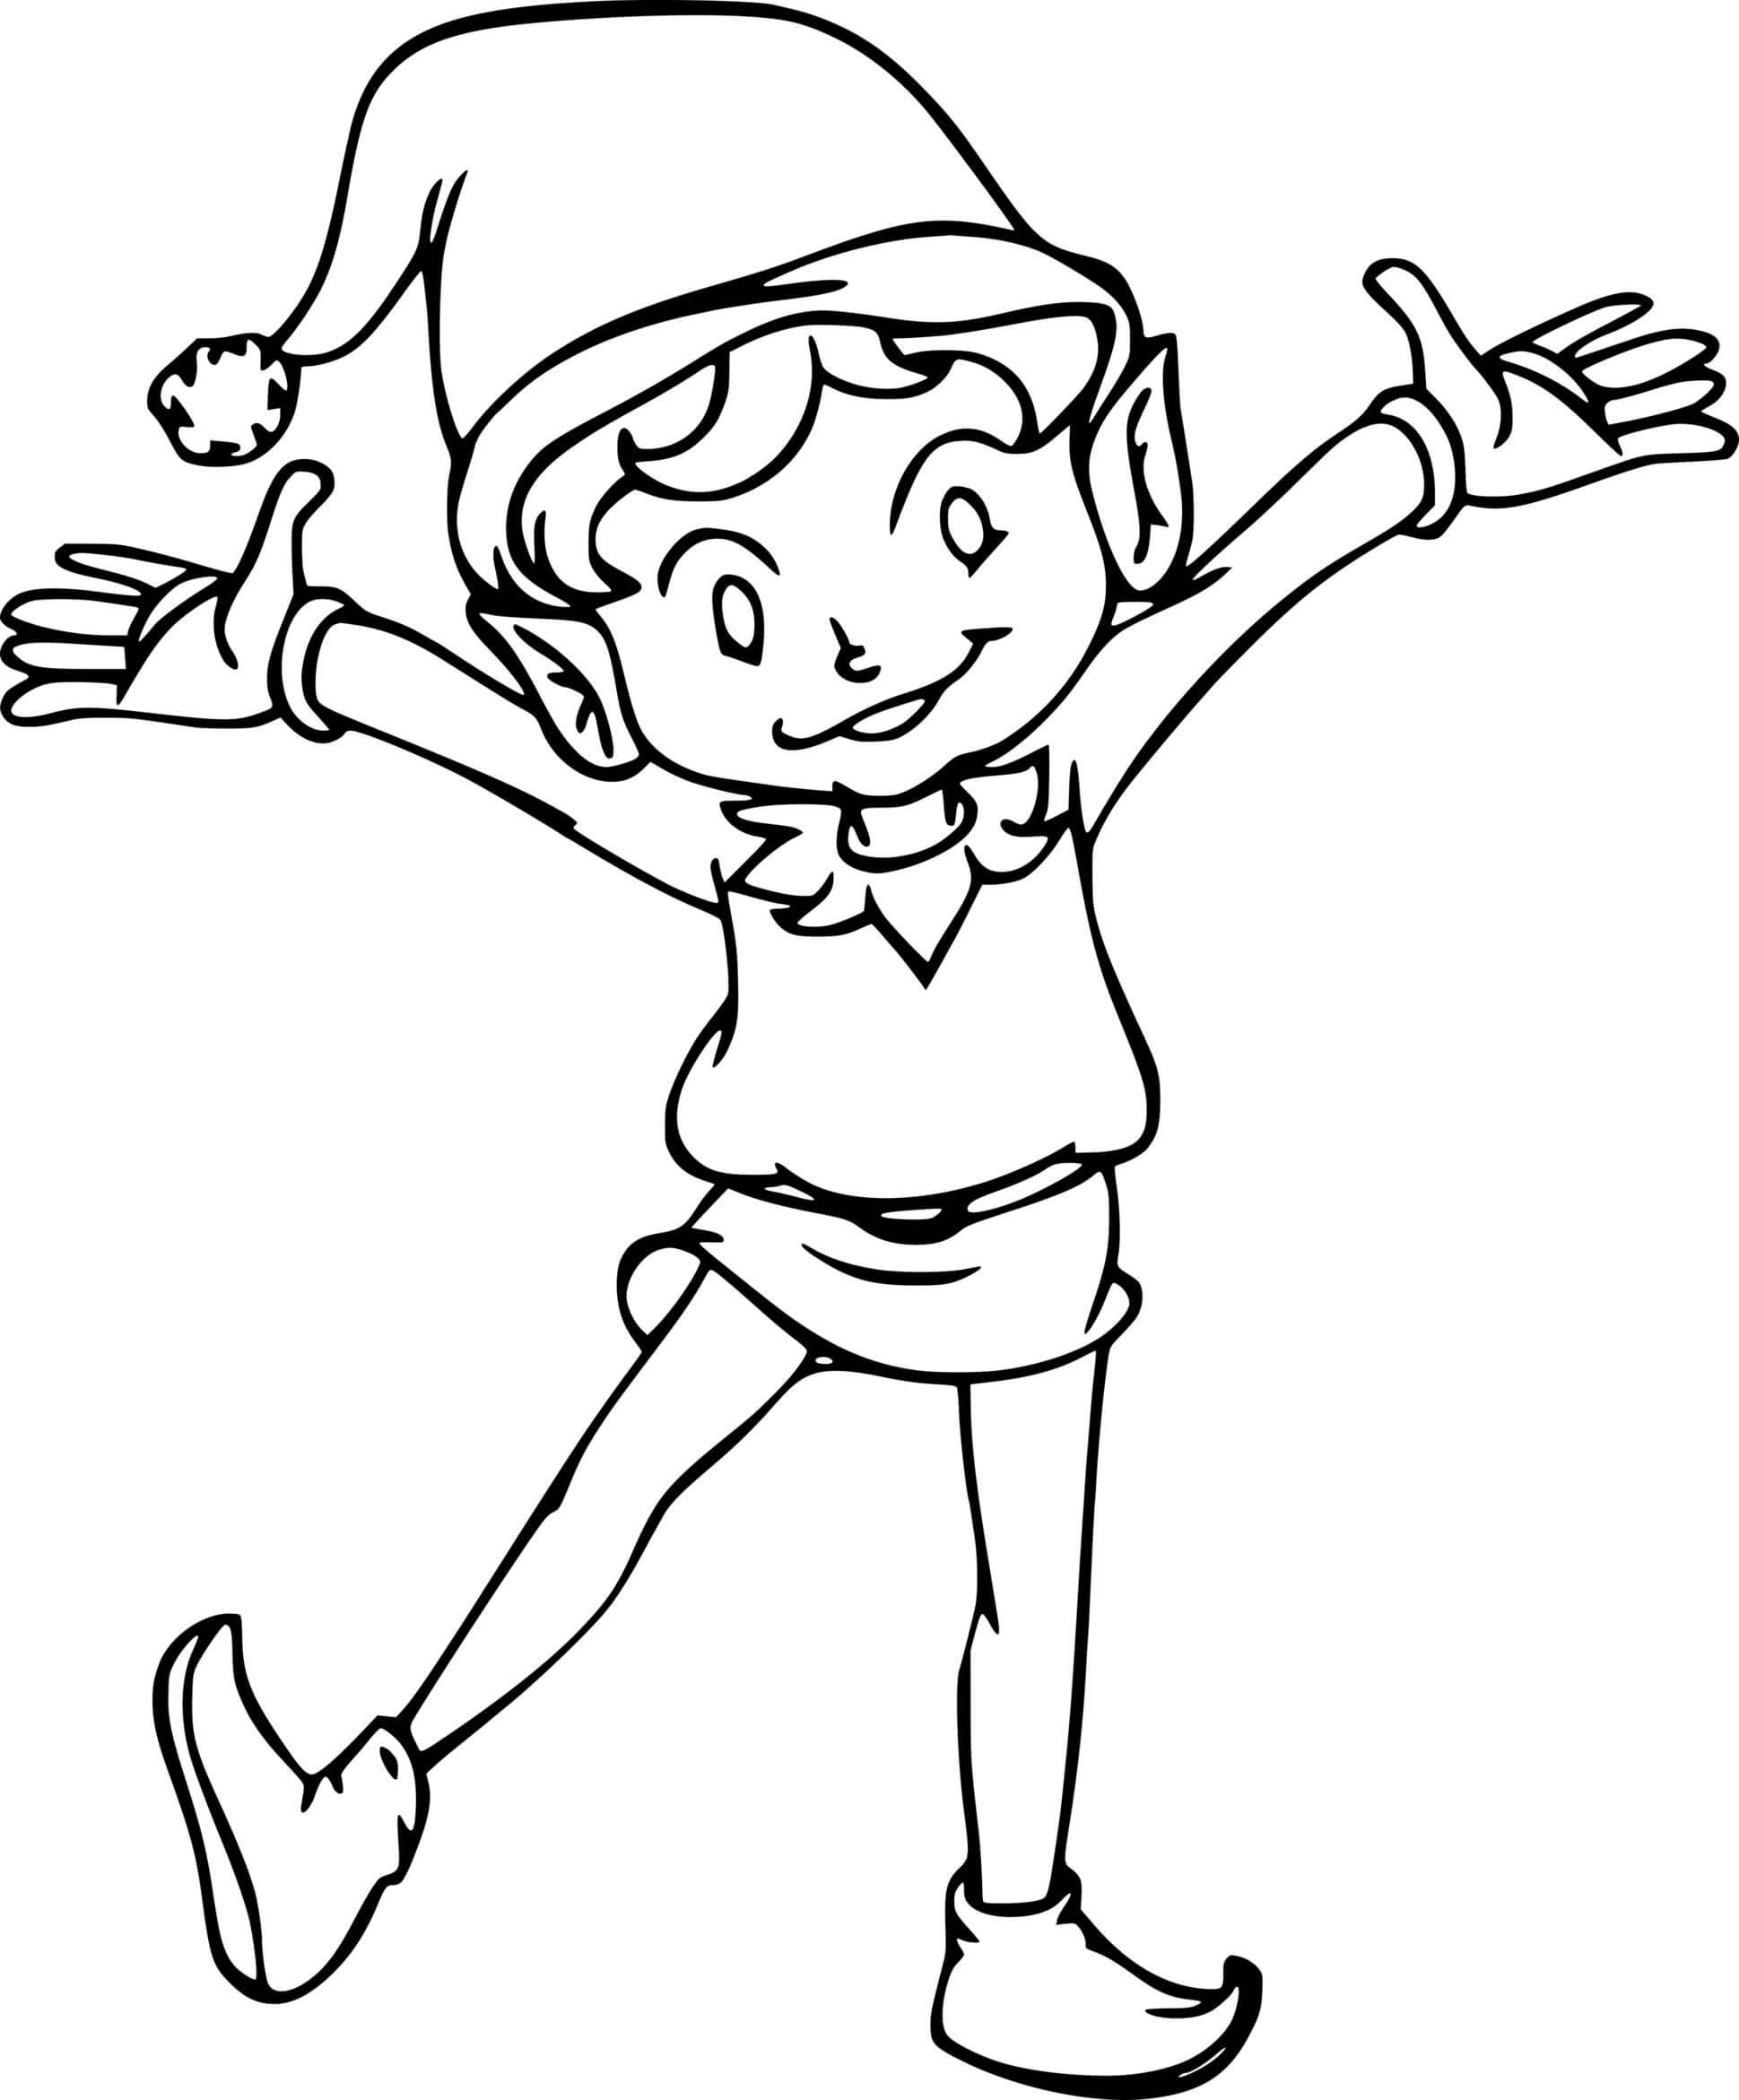 Young Elf Is Dancing Coloring Pages - Coloring Cool